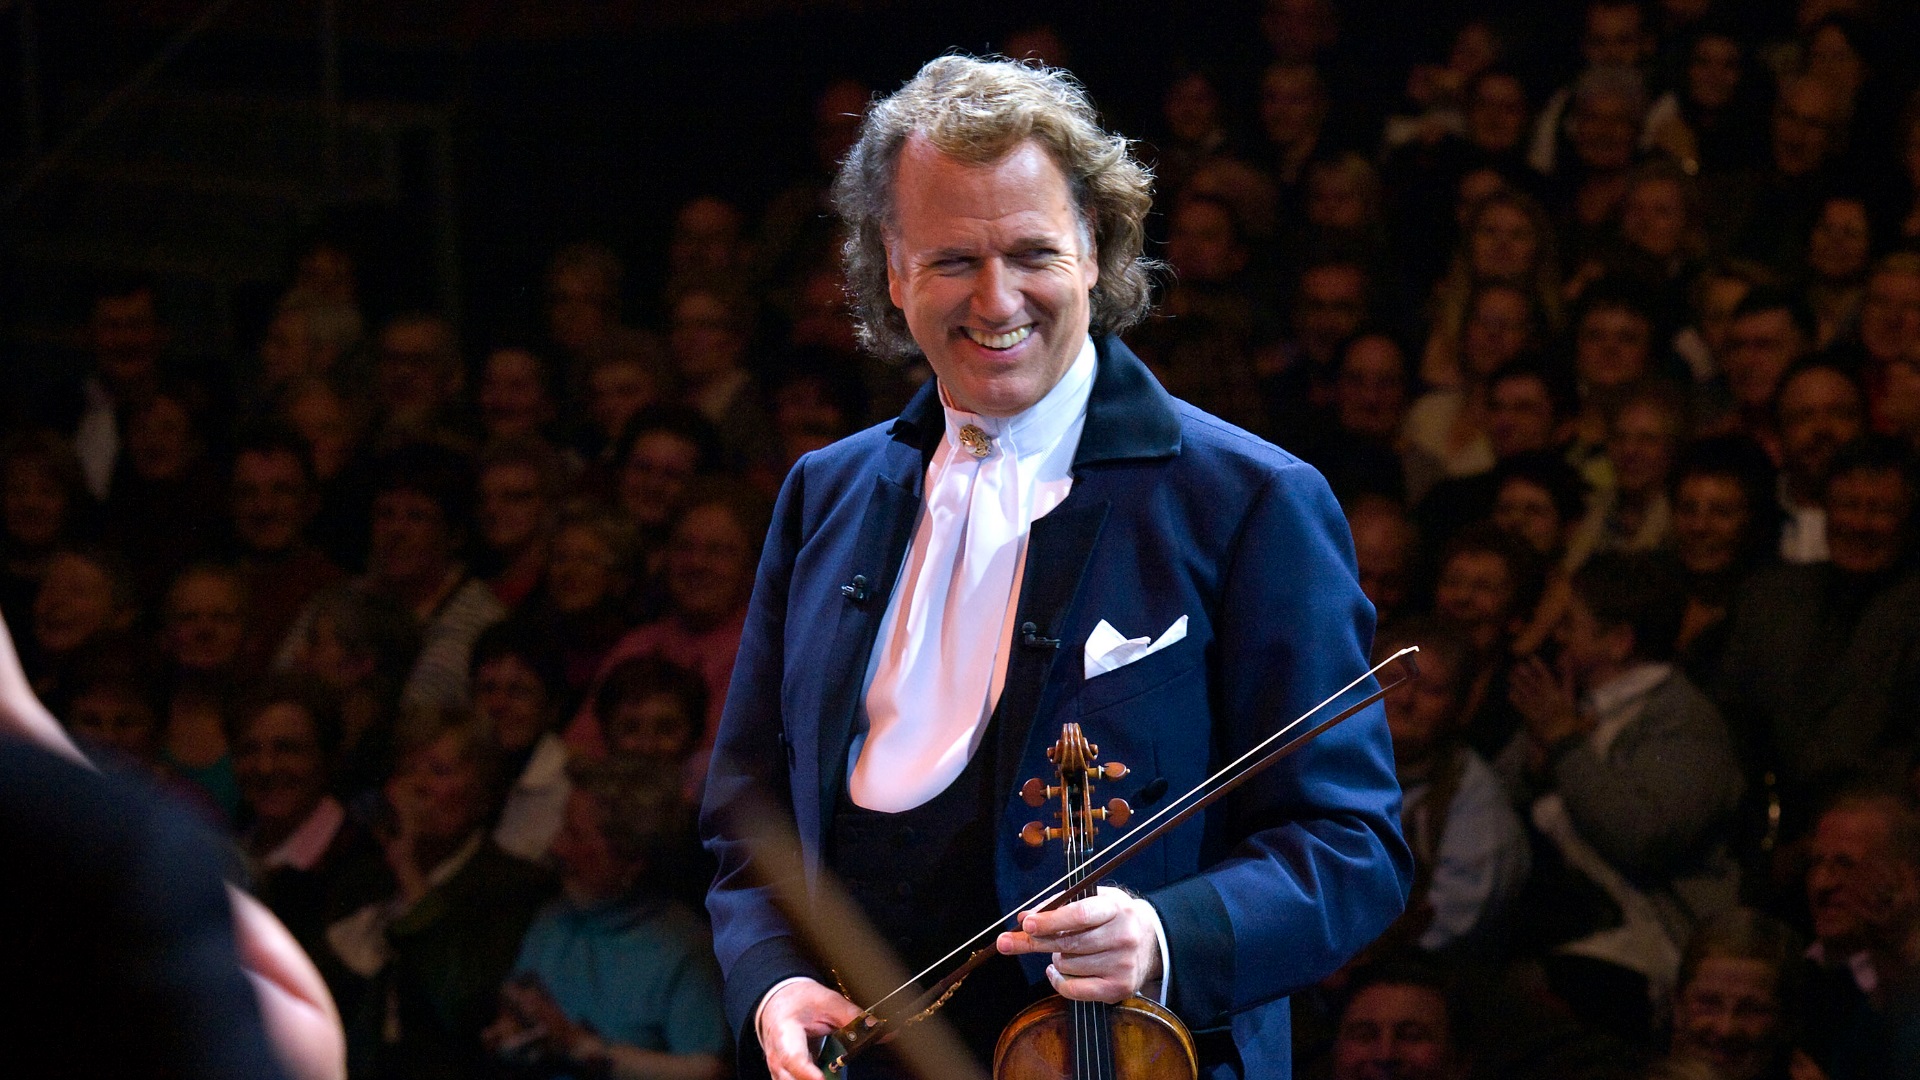 Palestinian artist collectives urge André Rieu to cancel shows in Tel Aviv